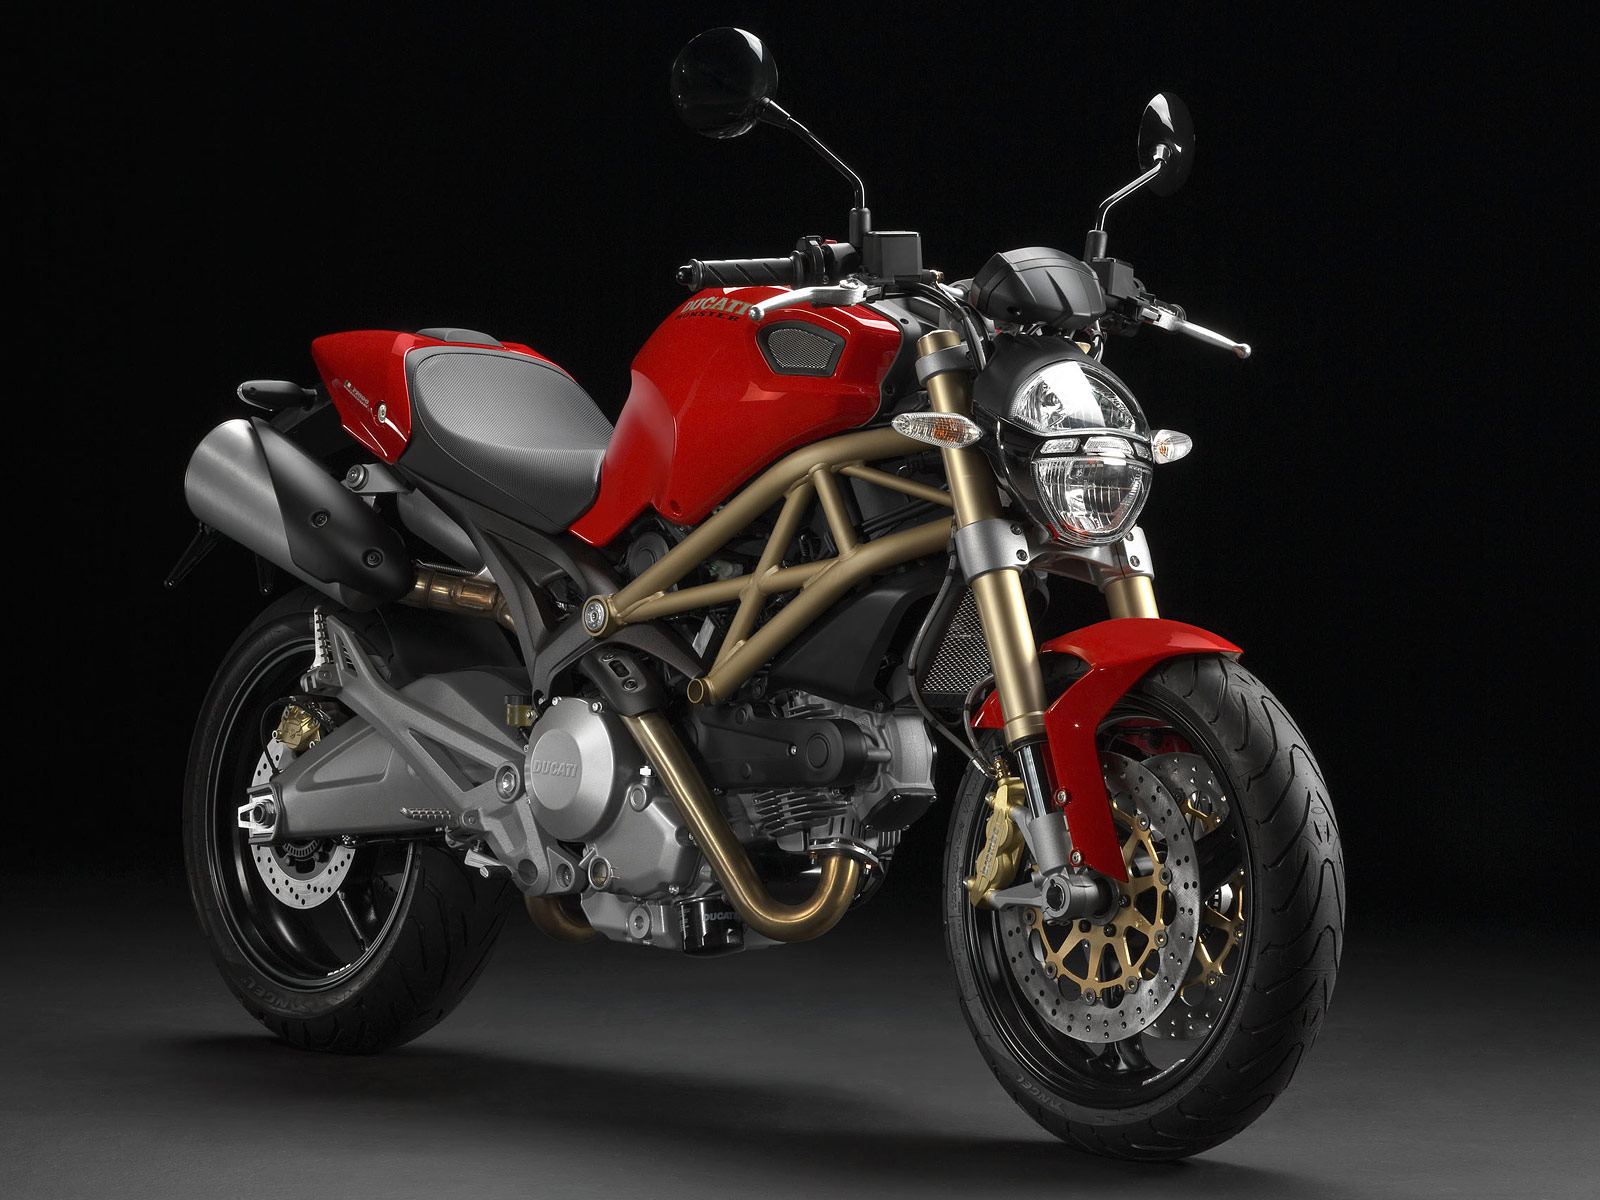 2013 Ducati Monster 696 20th Anniversary Review - Top Speed